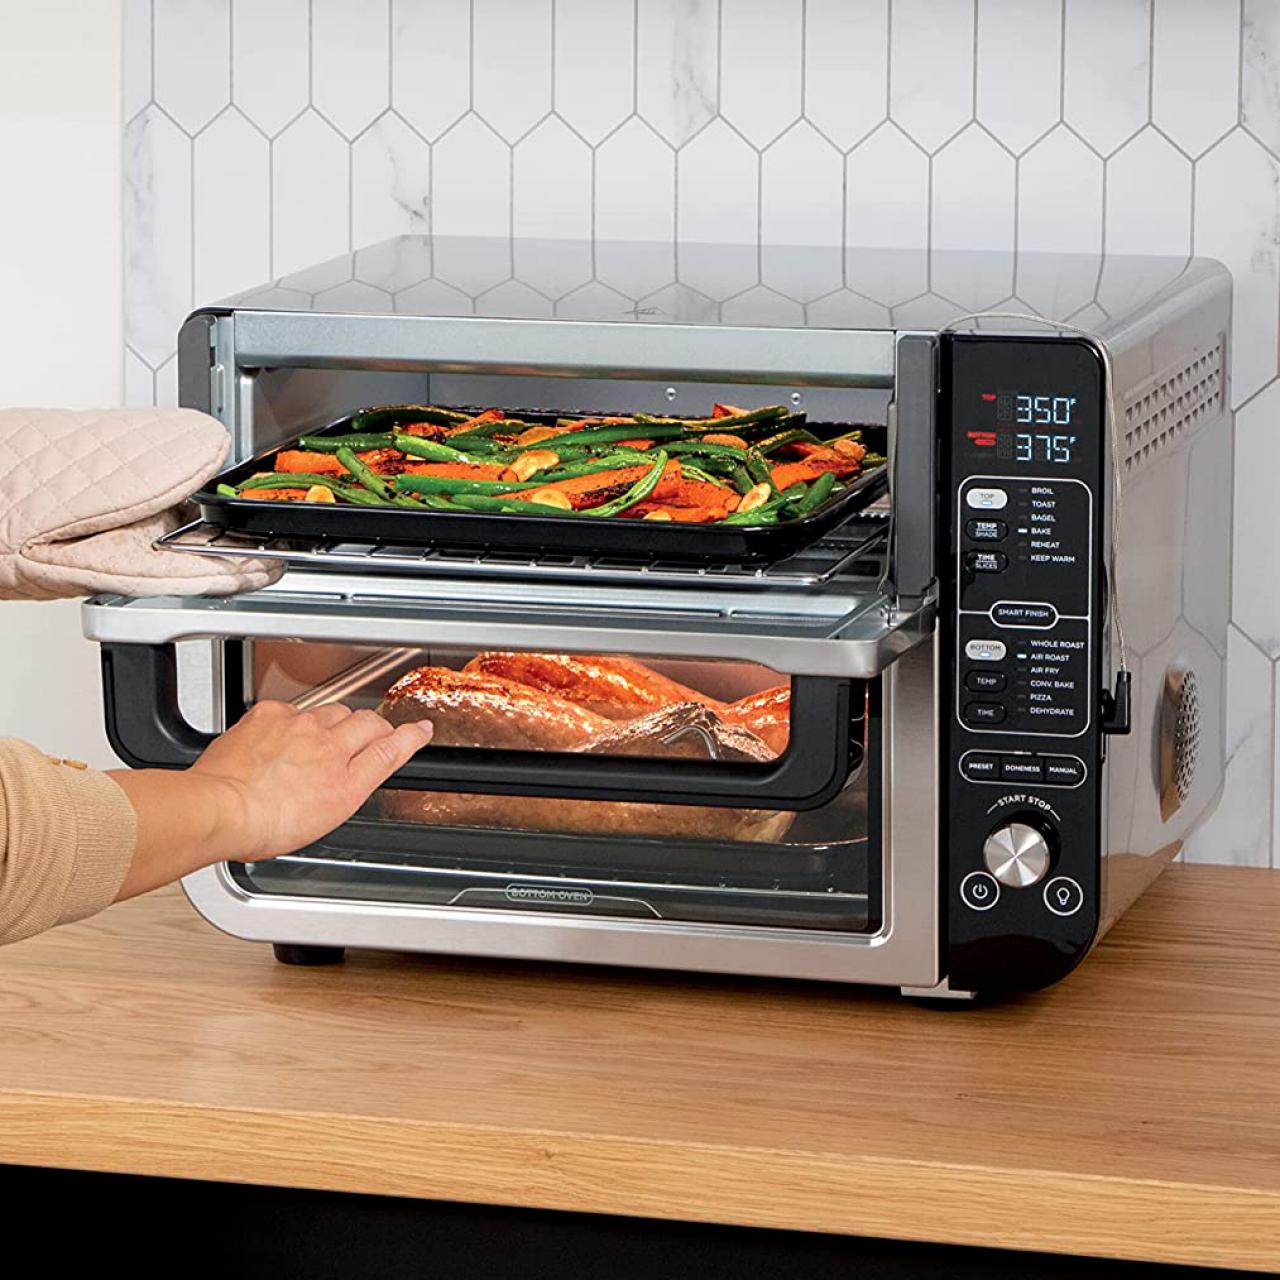 https://food.fnr.sndimg.com/content/dam/images/food/products/2023/6/1/rx_ninja-double-oven-review.jpg.rend.hgtvcom.1280.1280.suffix/1685647864981.jpeg